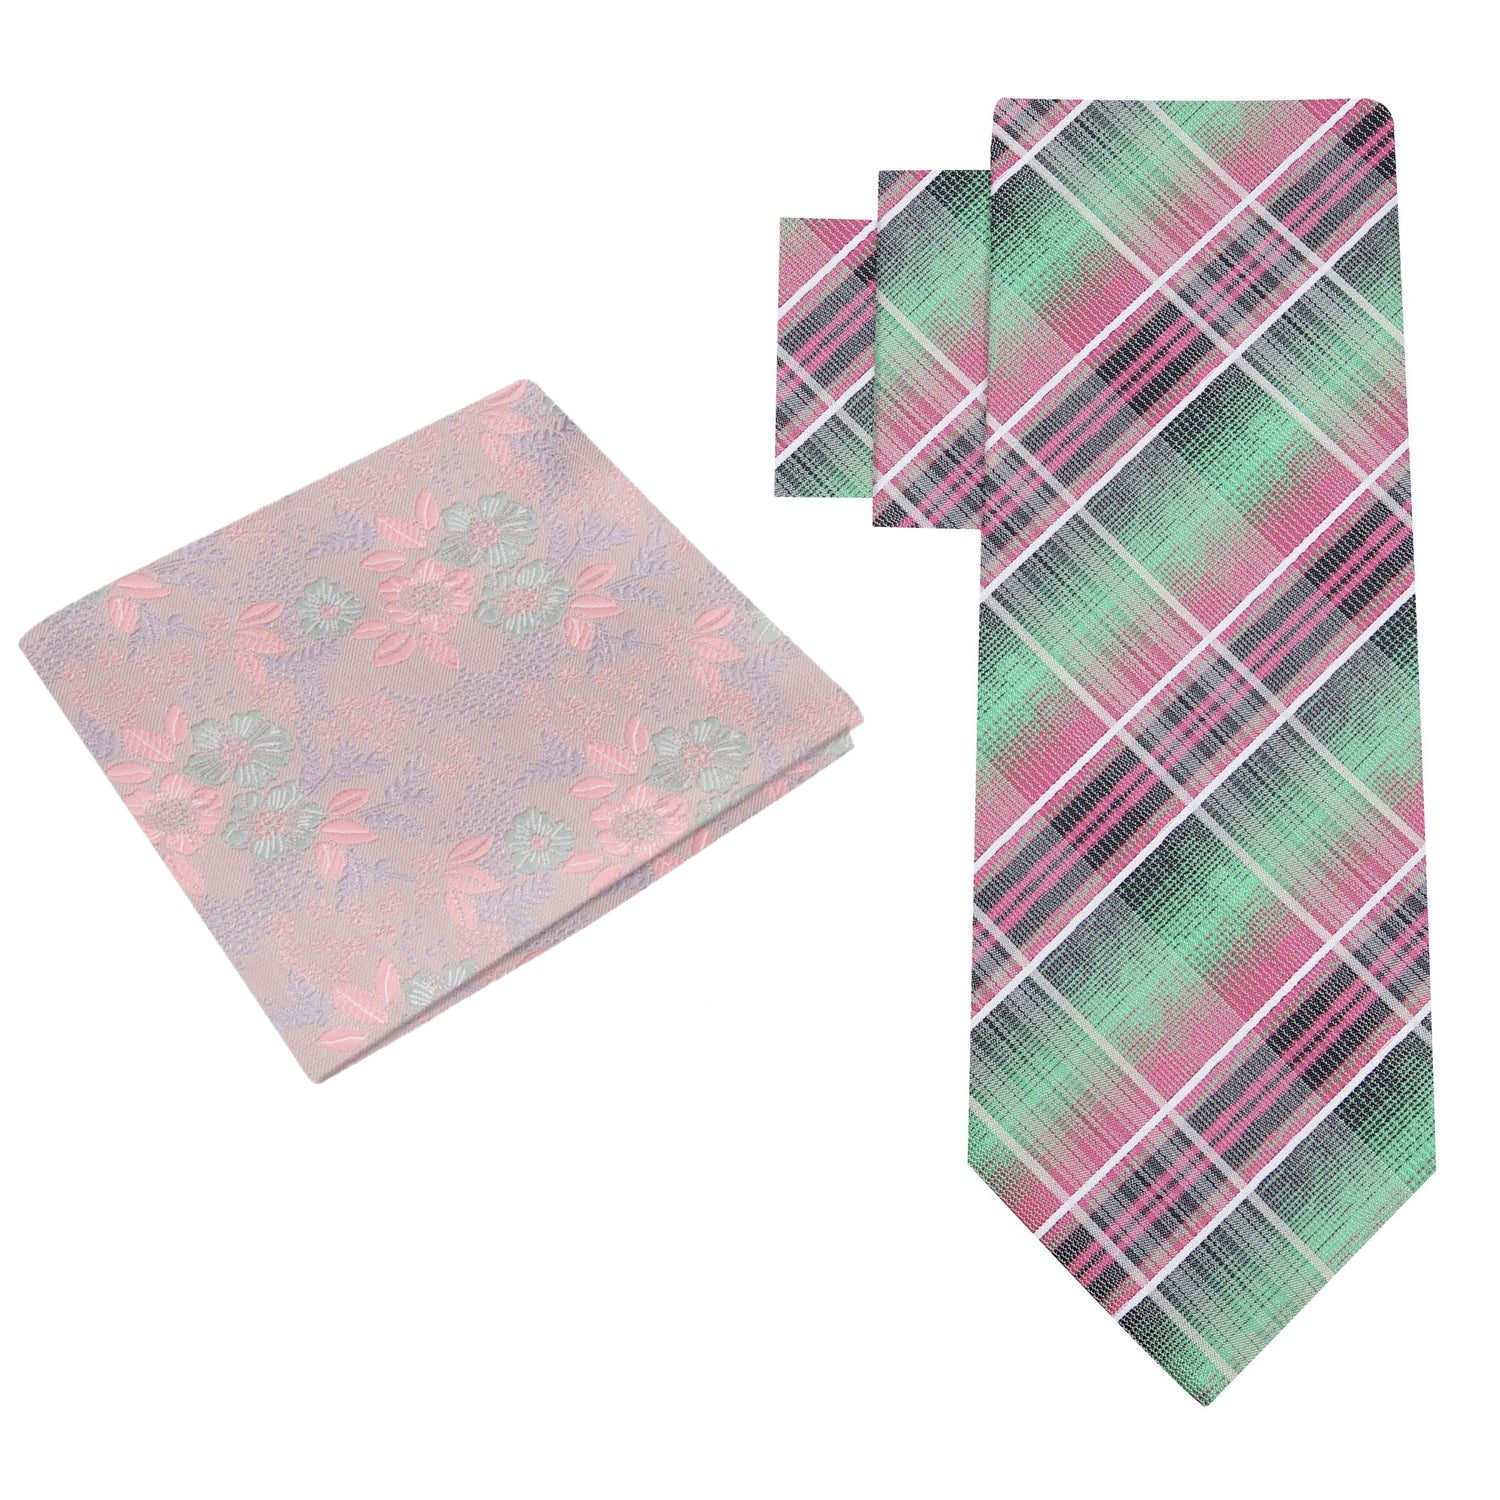 Alt View:  Green, Pink and White Plaid Necktie and Accenting Floral Square